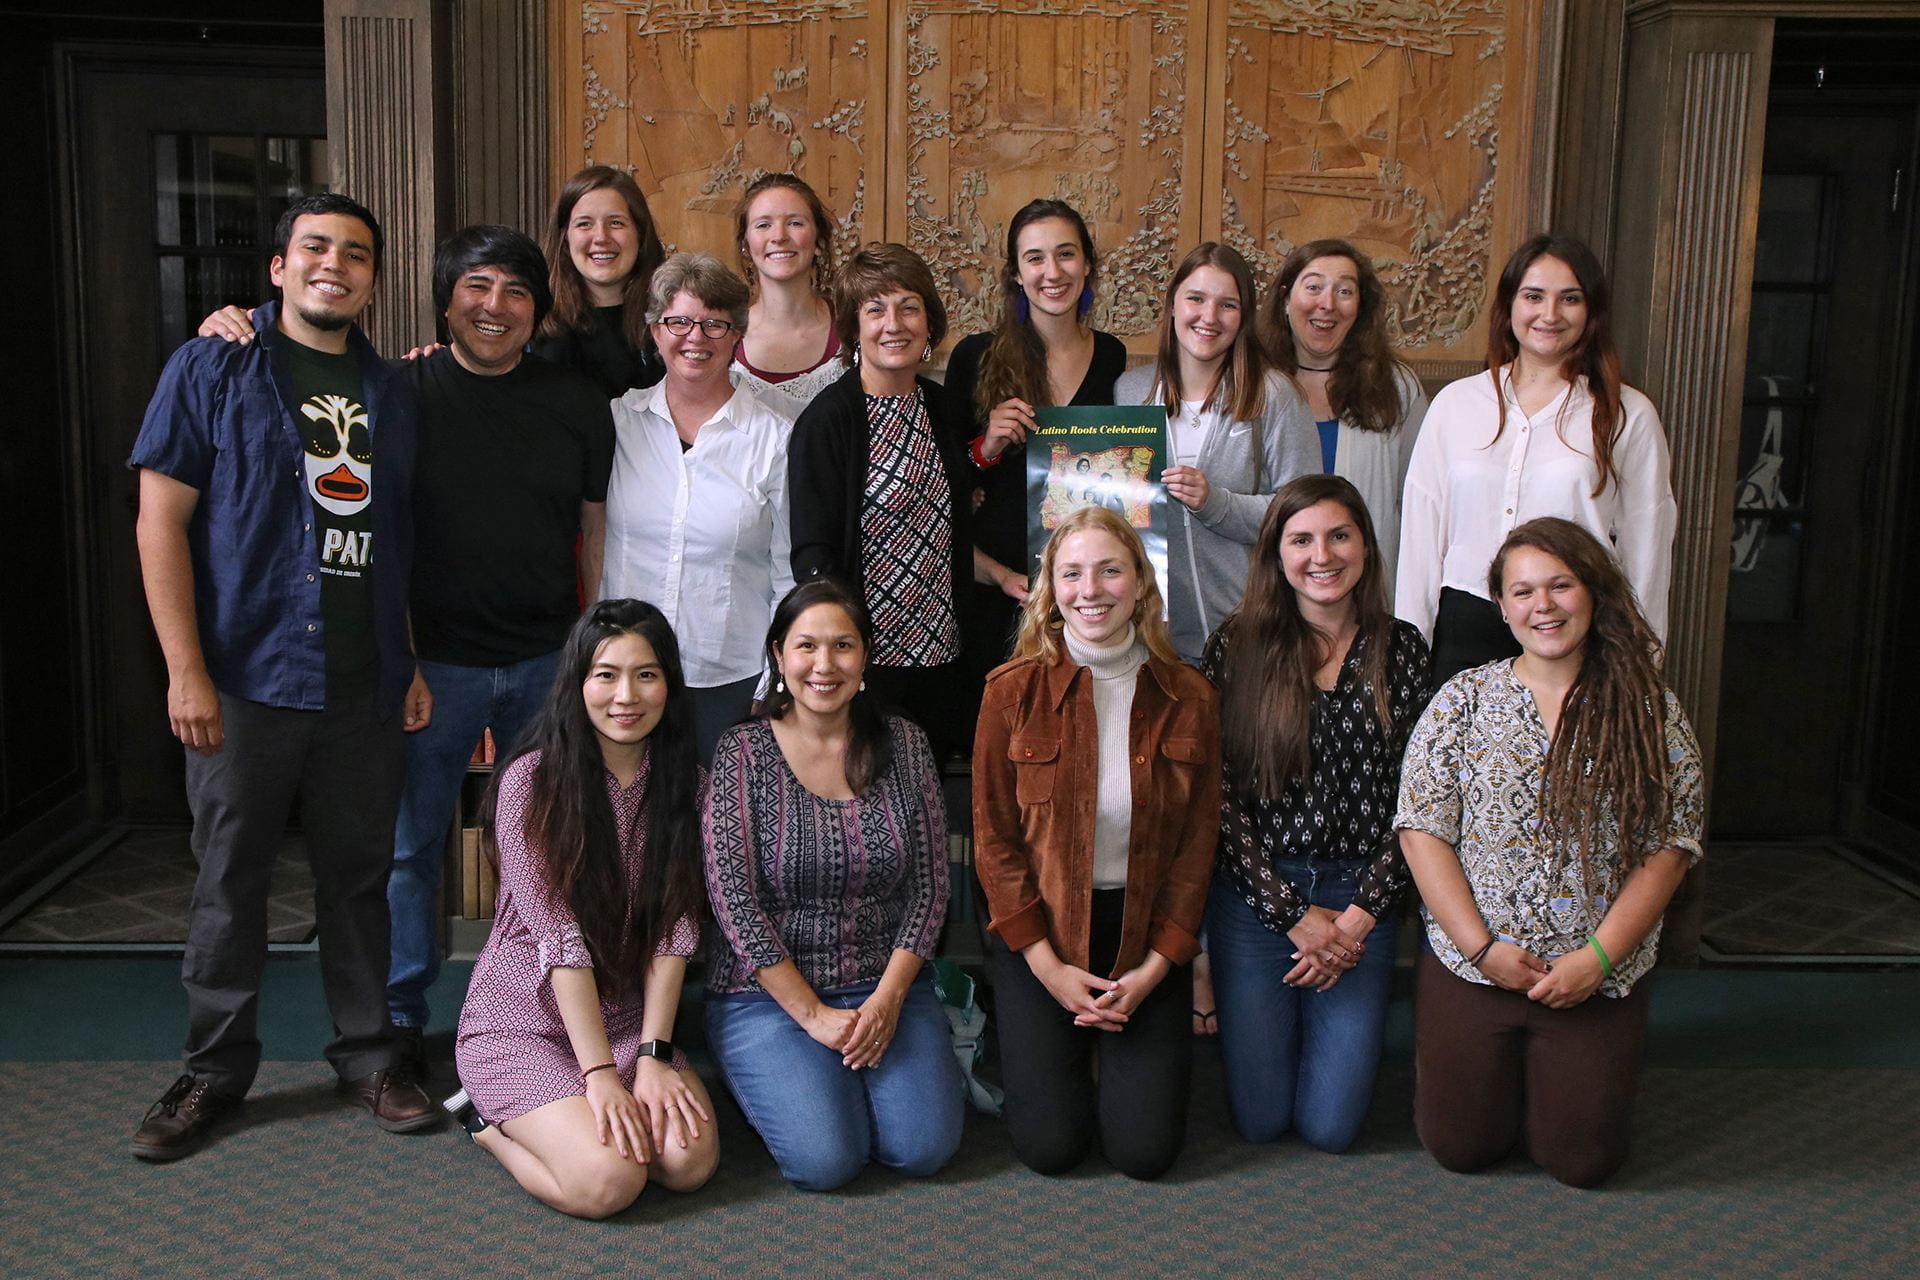 A group of 13 students and two professors, Dr. Lynn Stephen and Dr. Gabriela Martinez.